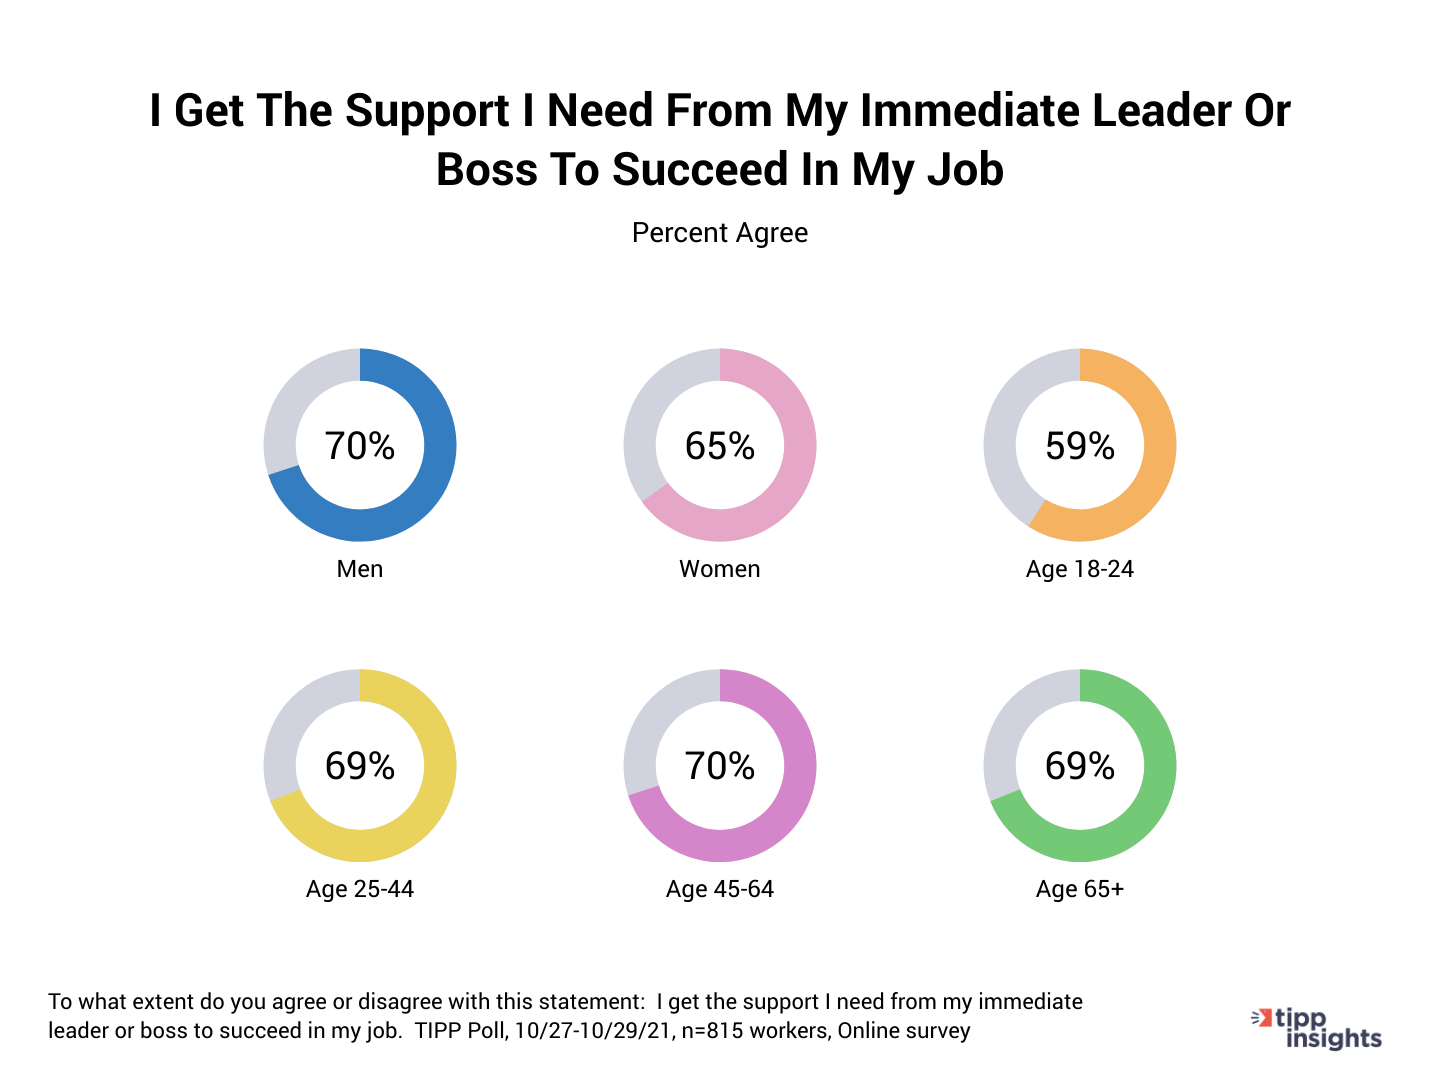 TIPP Poll Results: Do Workers in America recieve the support they need from immediate boss or leader to succeed at job?